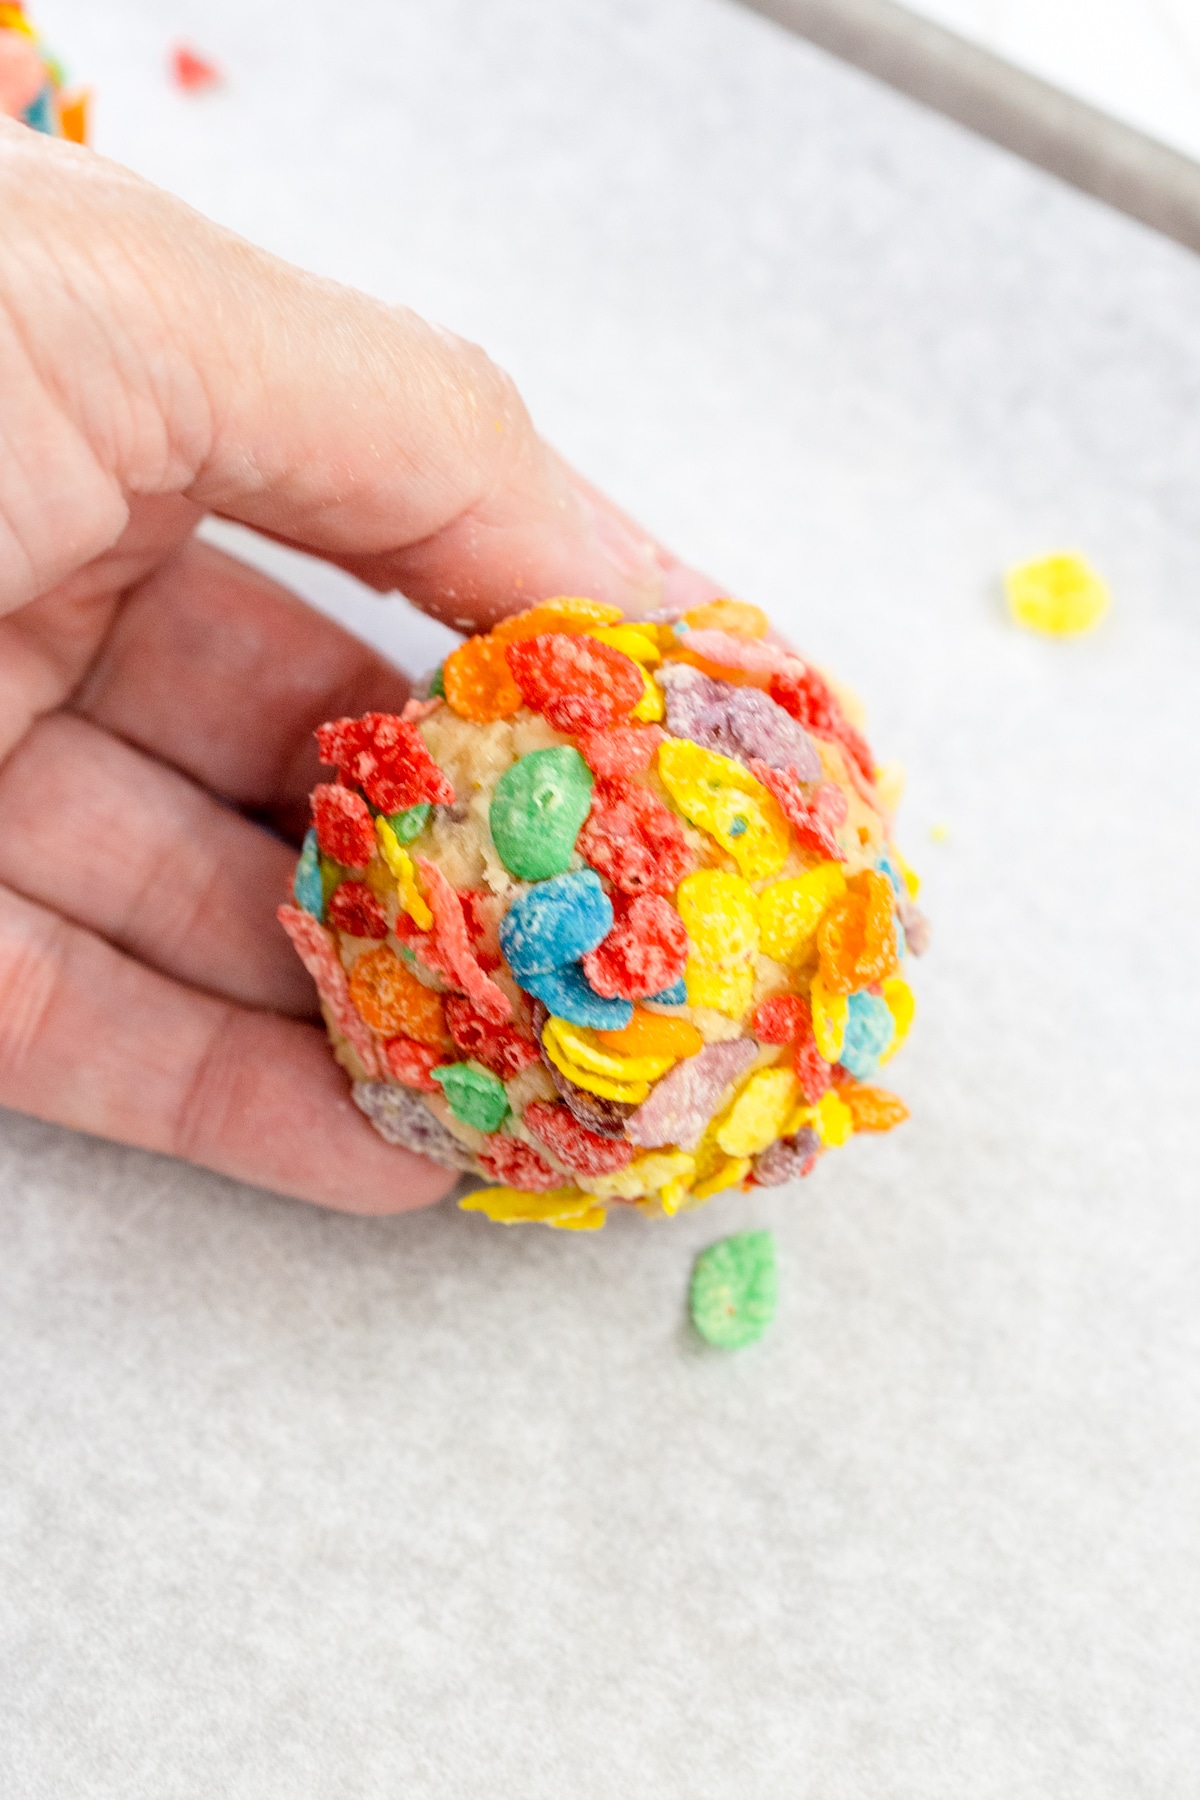 Top view of someone holding a ball of fruity pebble cookie dough in their hand.